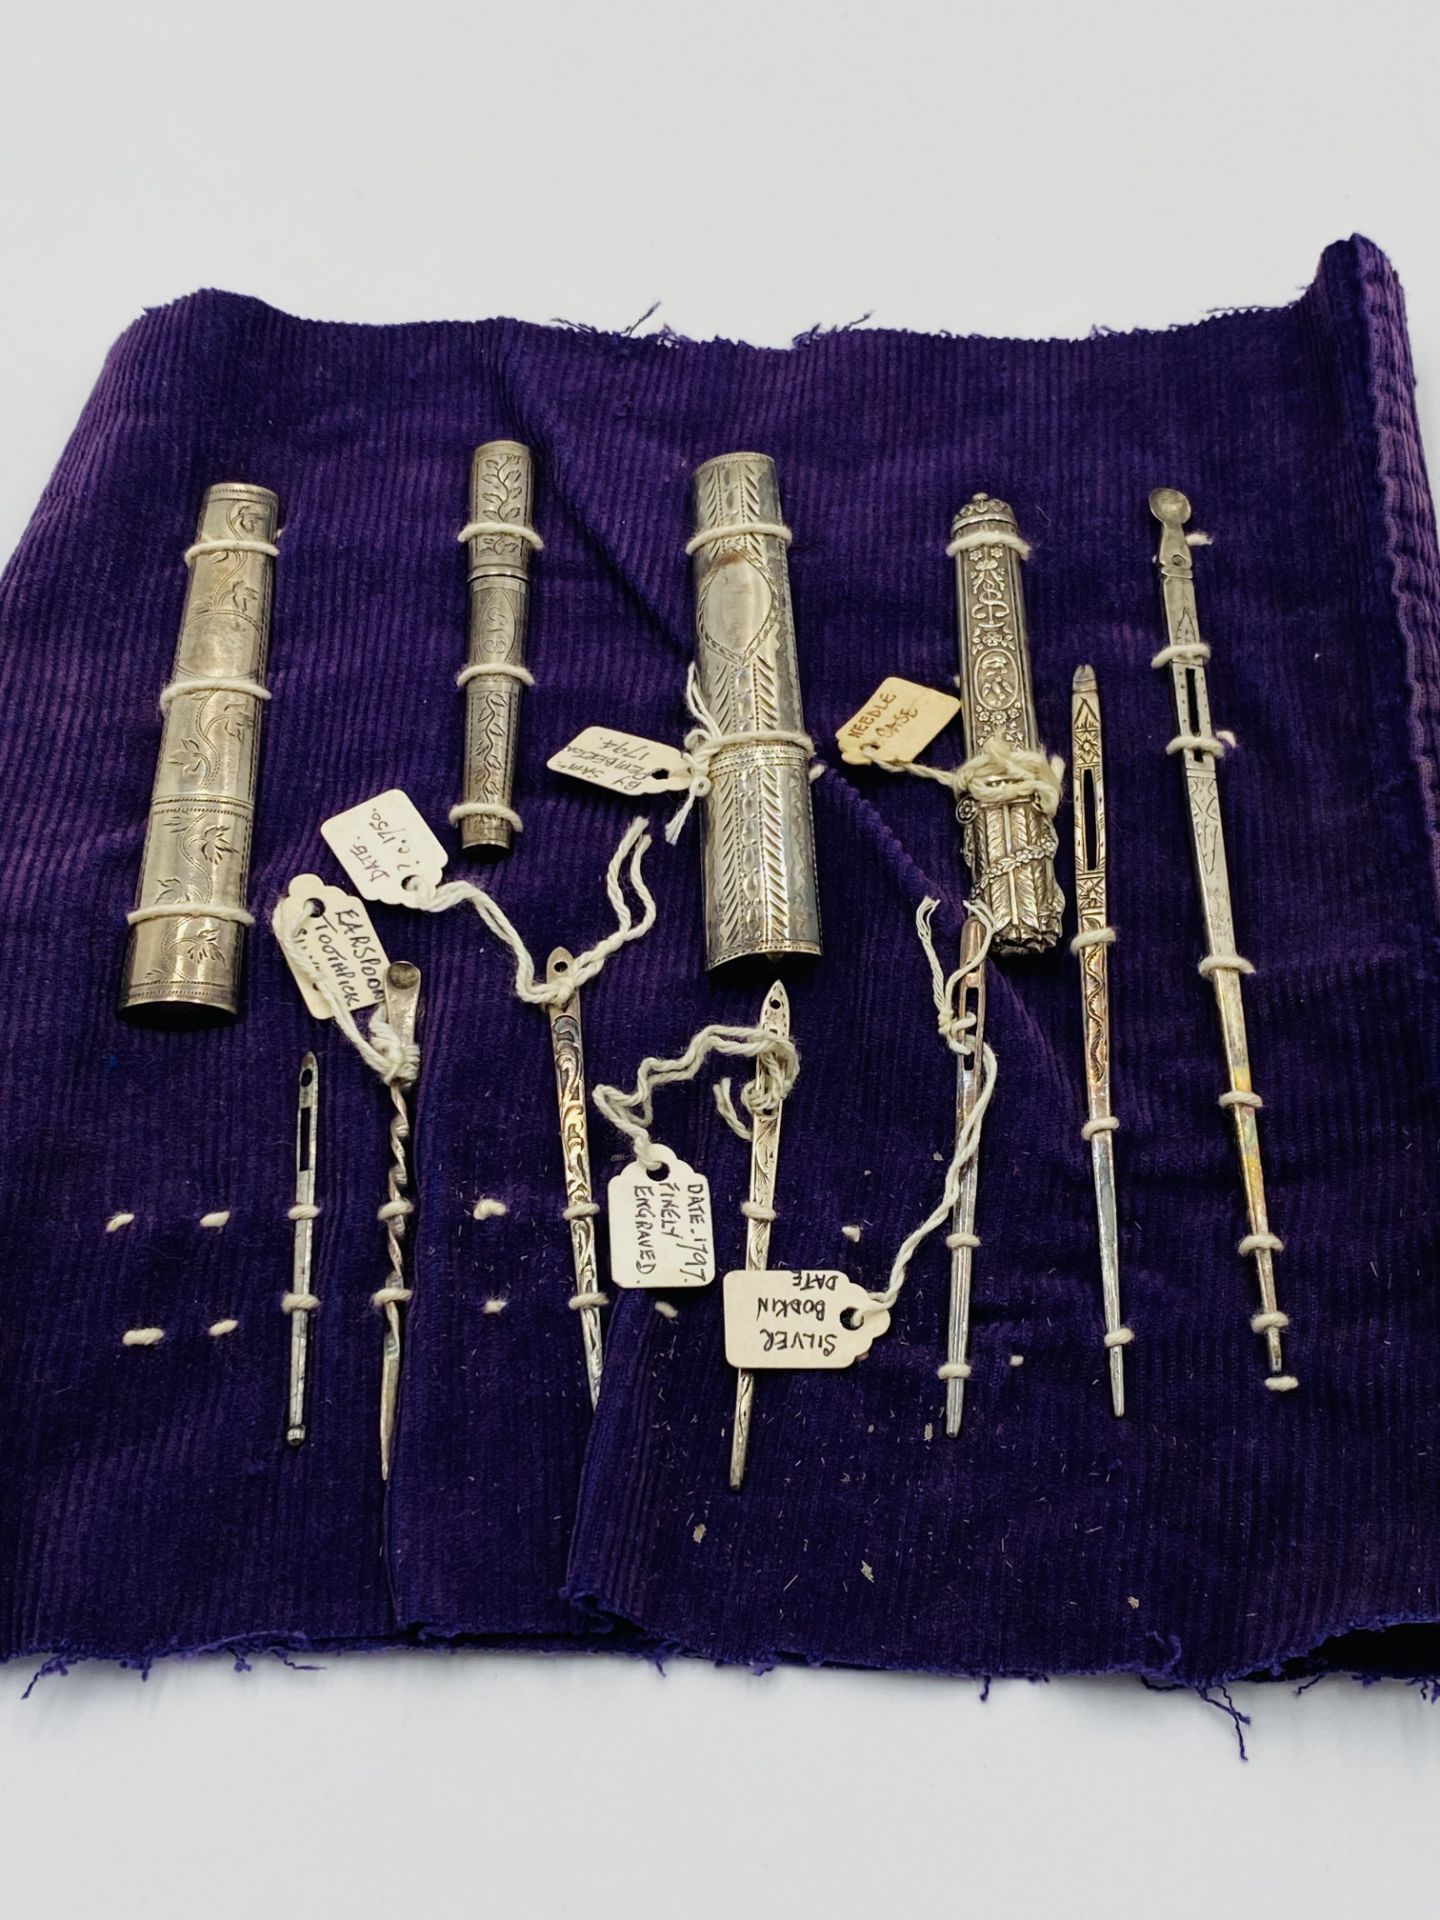 A collection of silver needle cases and bodkins - Image 5 of 5